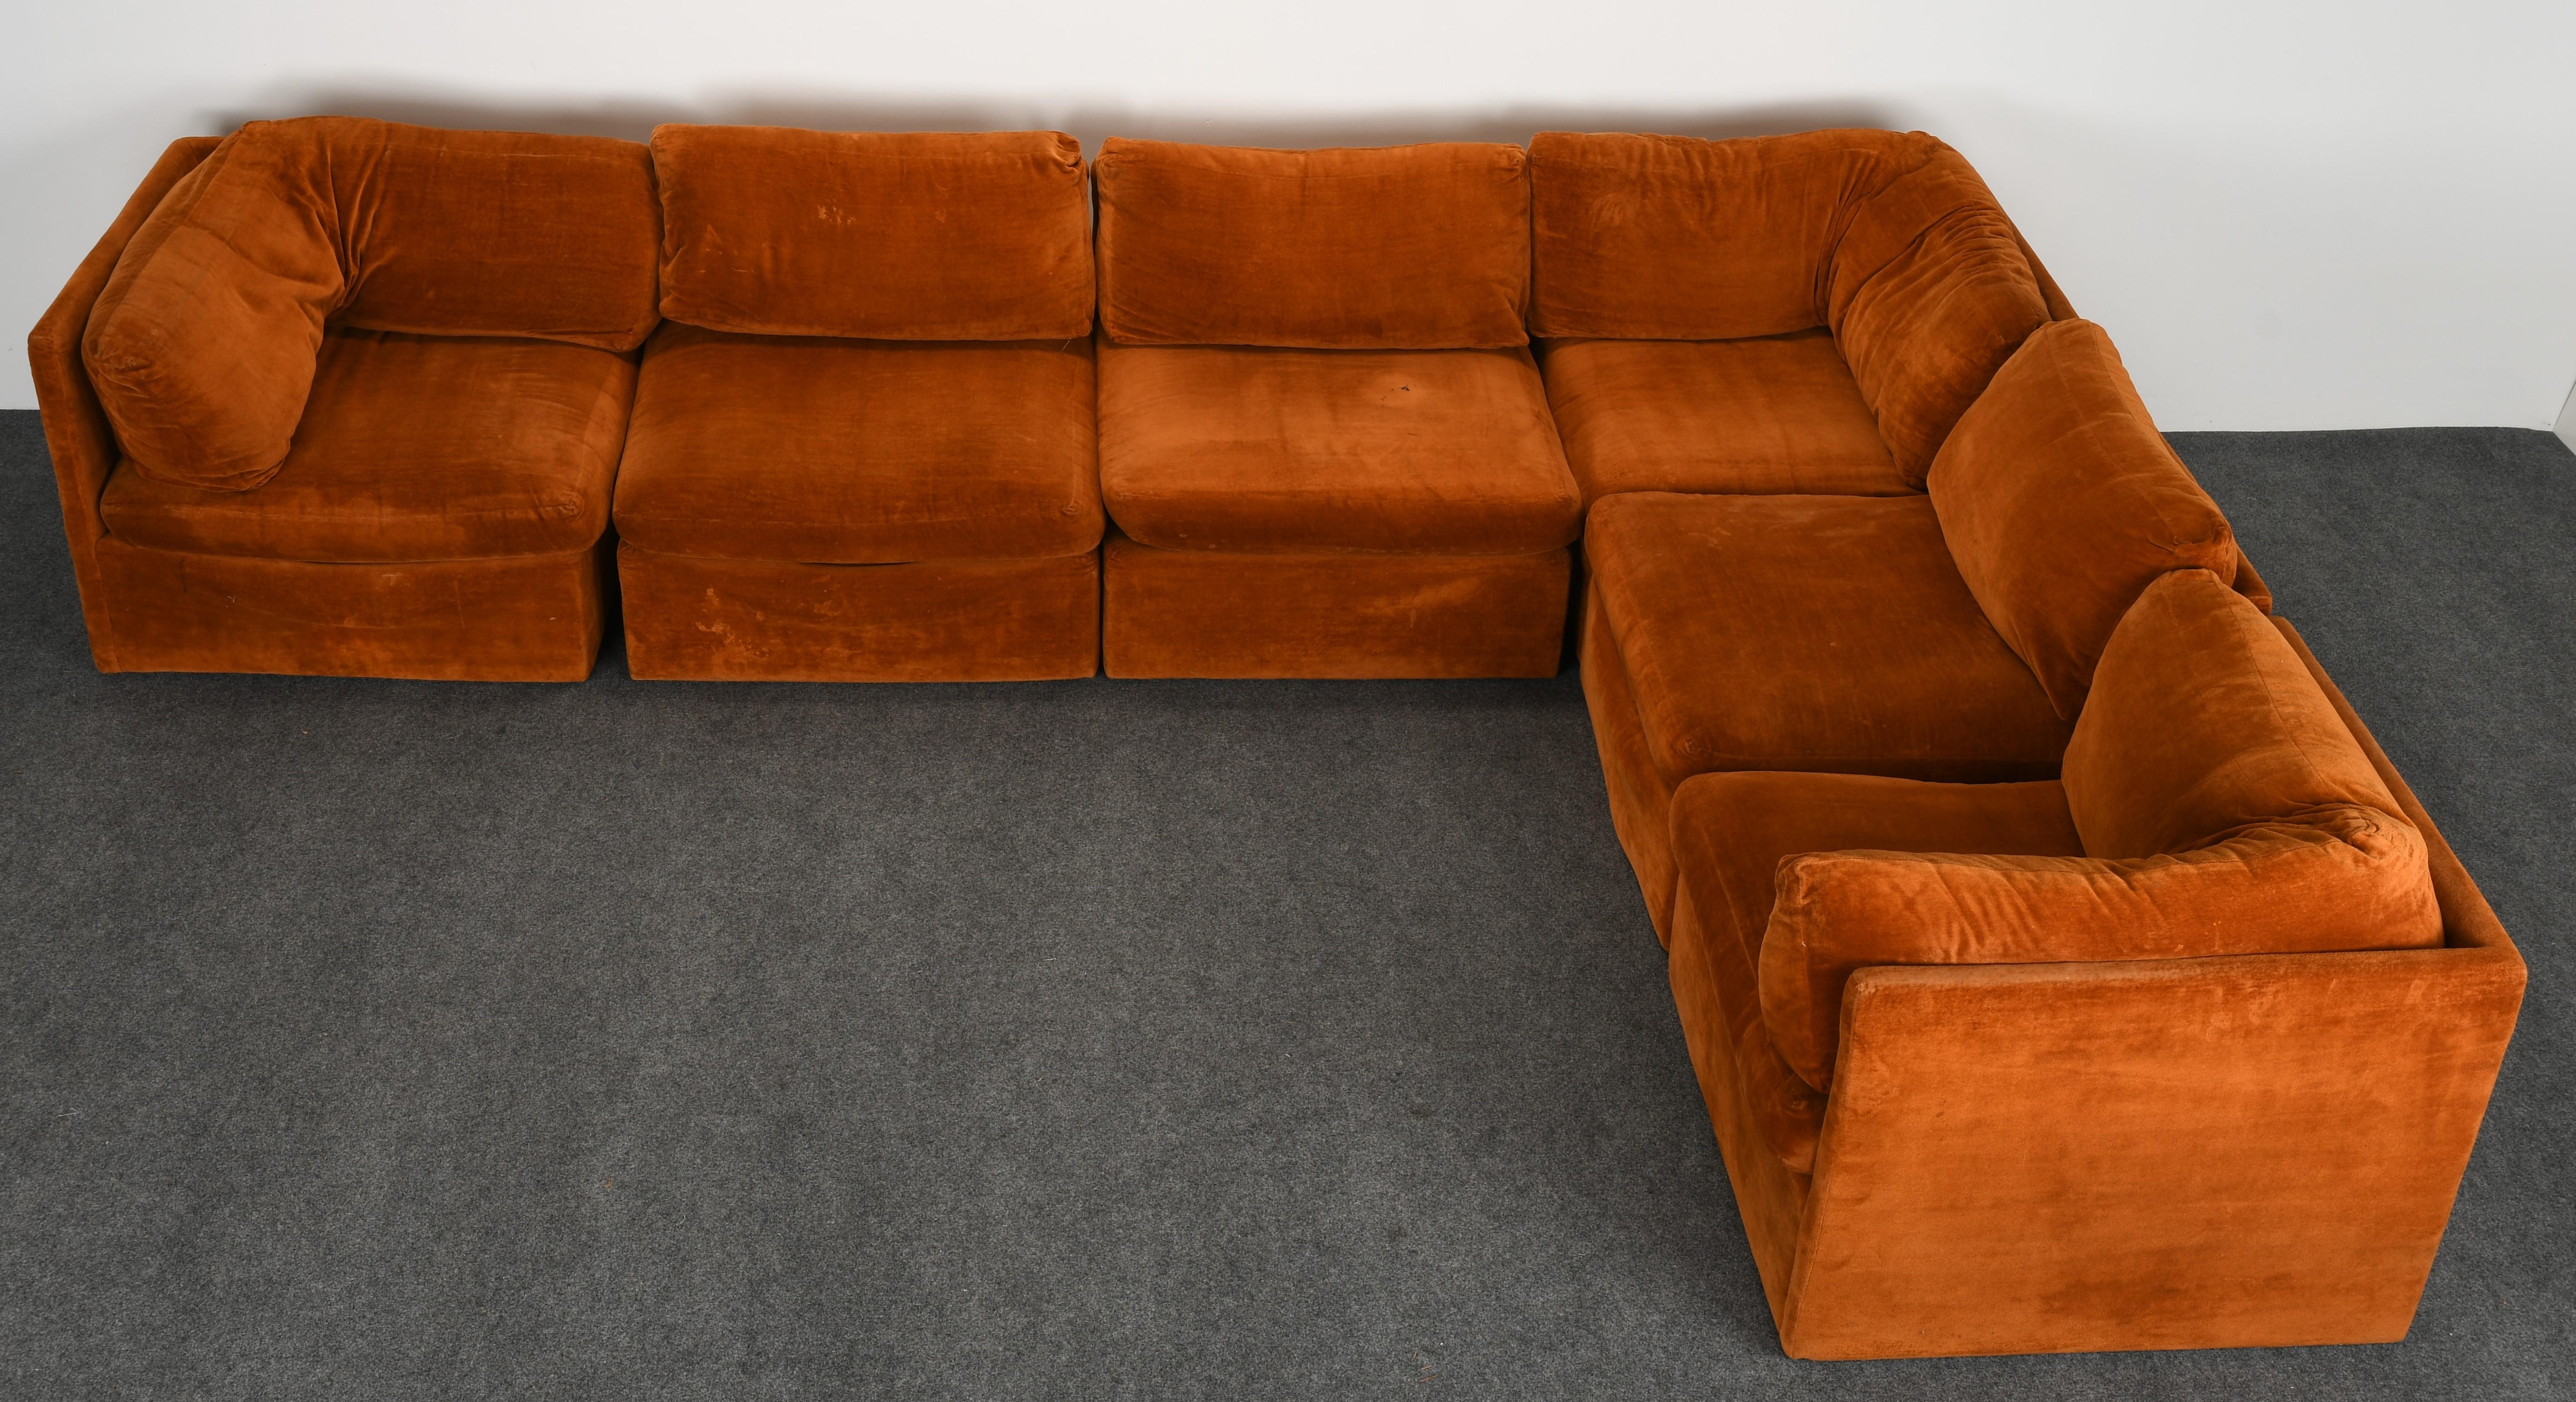 A comfortable sectional sofa designed by Milo Baughman for Thayer Coggins. This sofa is comprised of six sections which can be modified to your specifications. The fabric is in vintage condition, reupholstery is necessary. The sofa is structurally